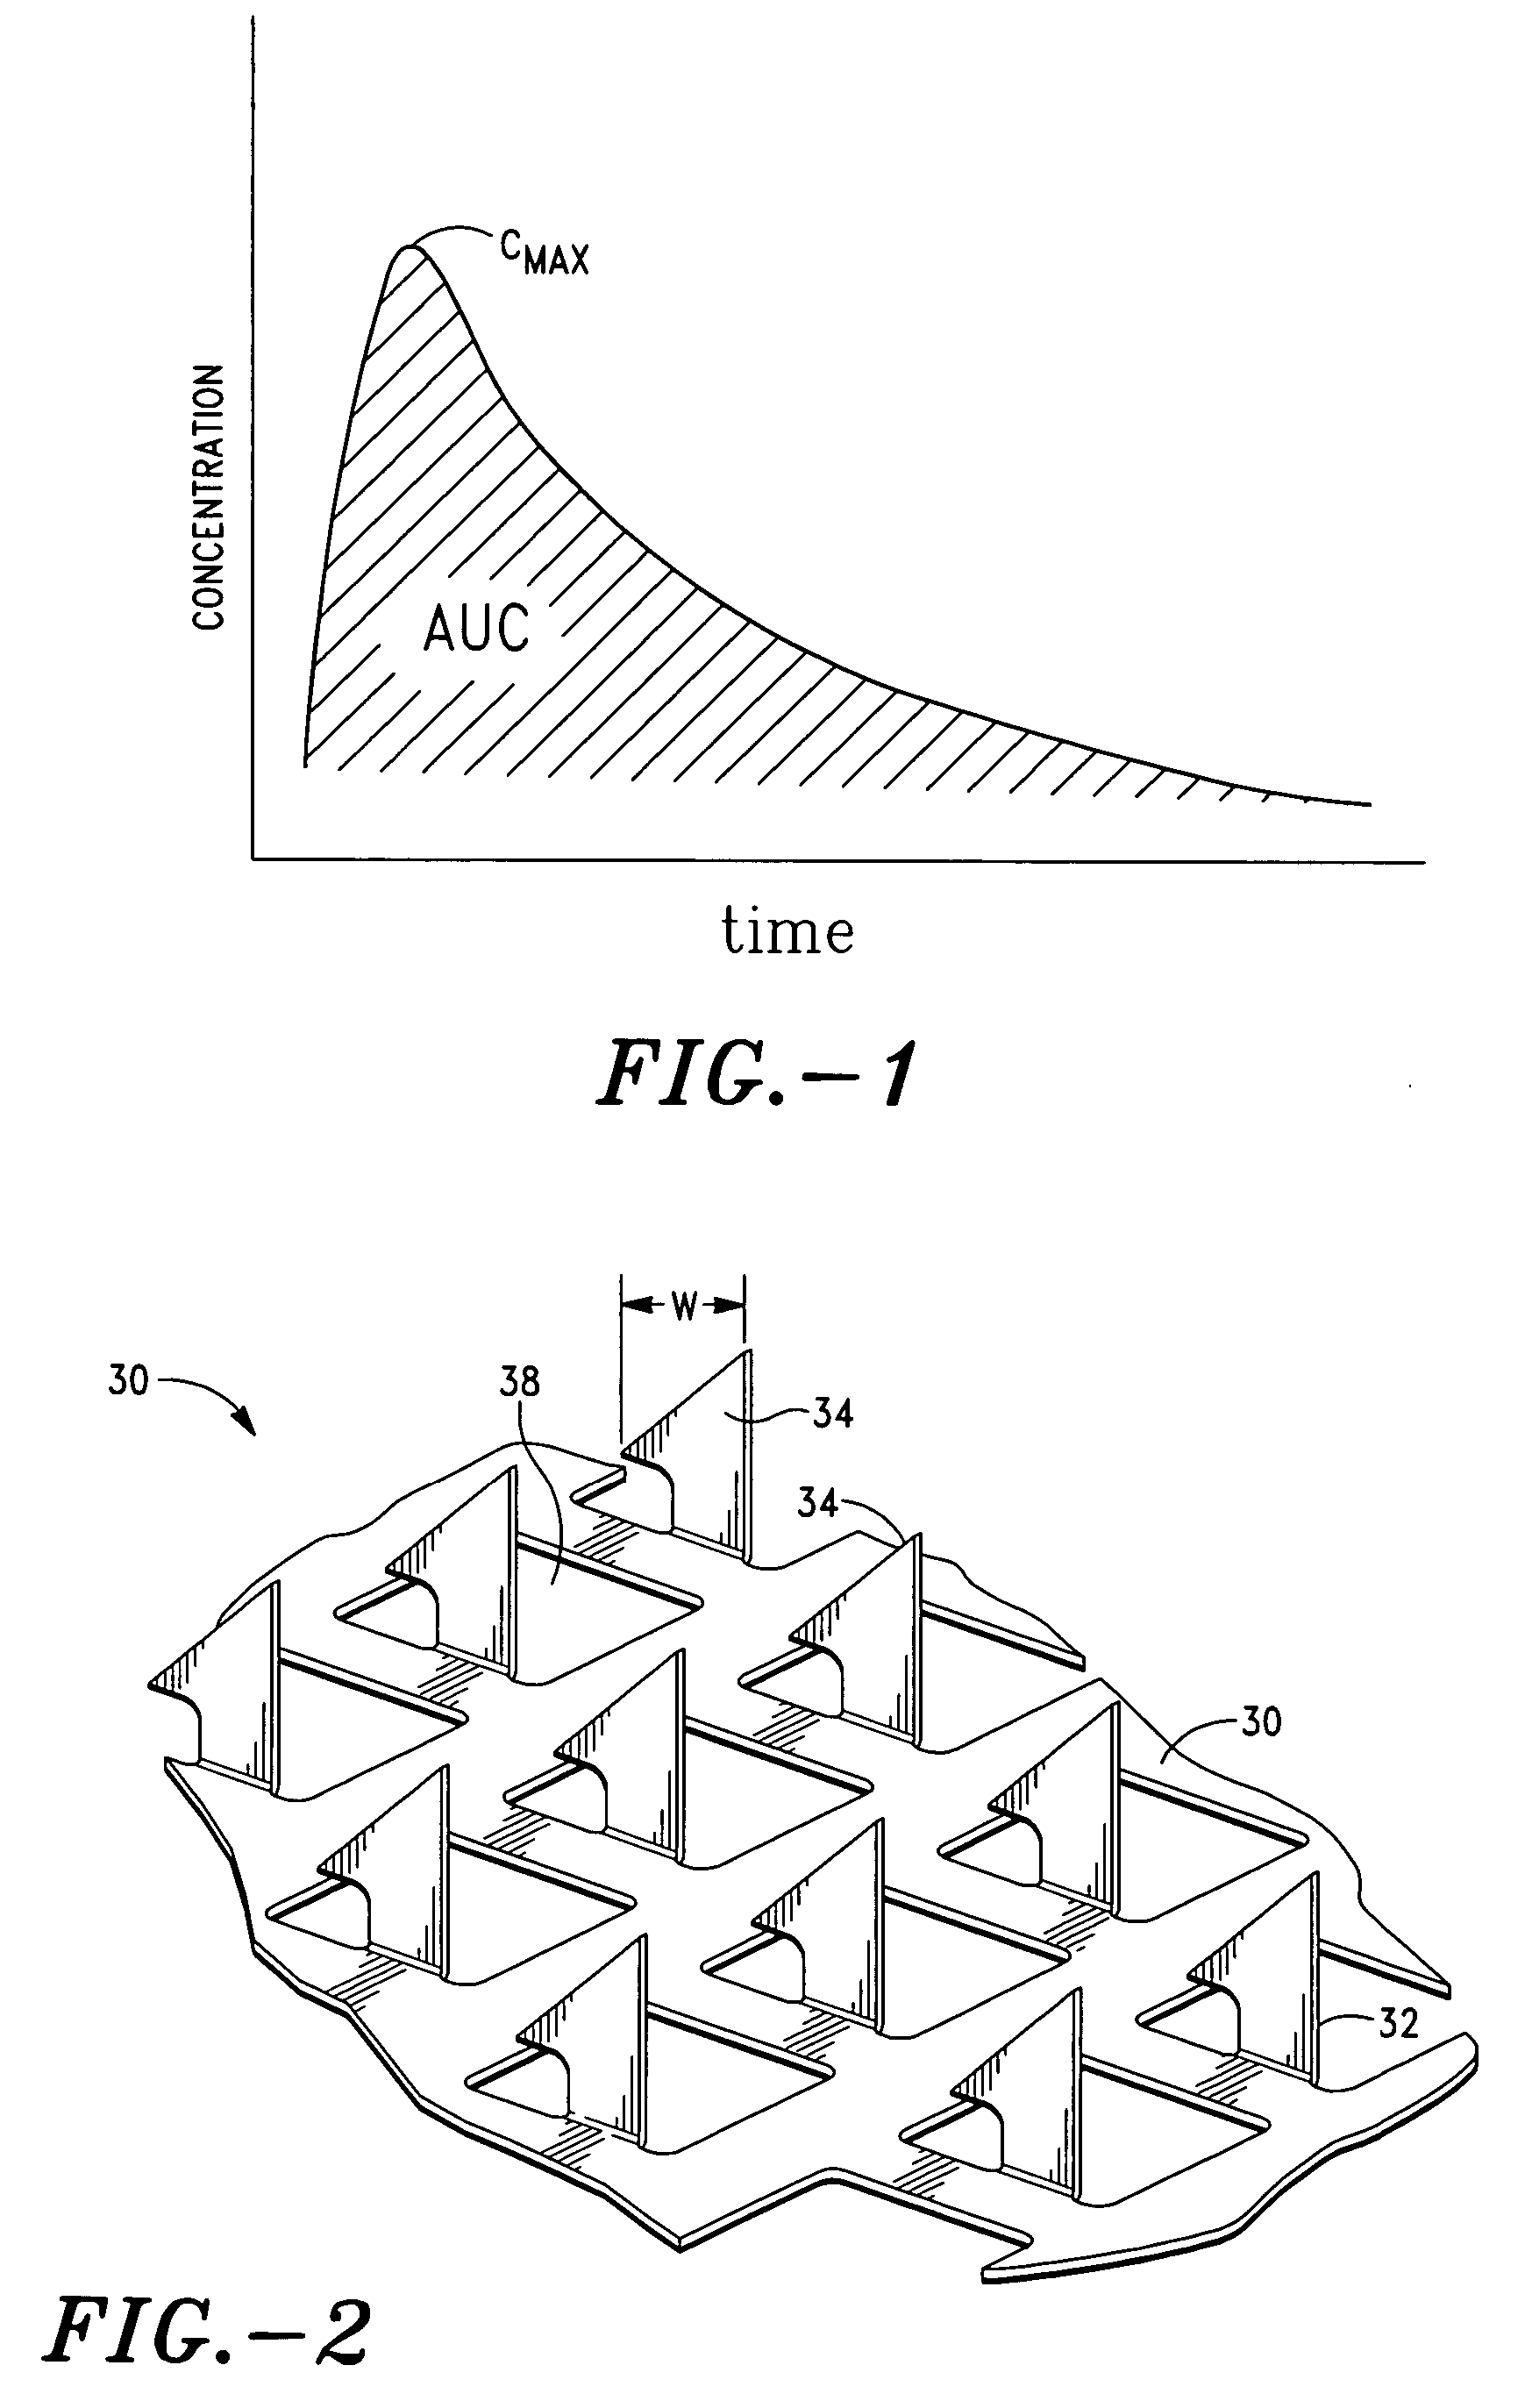 Apparatus and method for transdermal delivery of parathyroid hormone agents